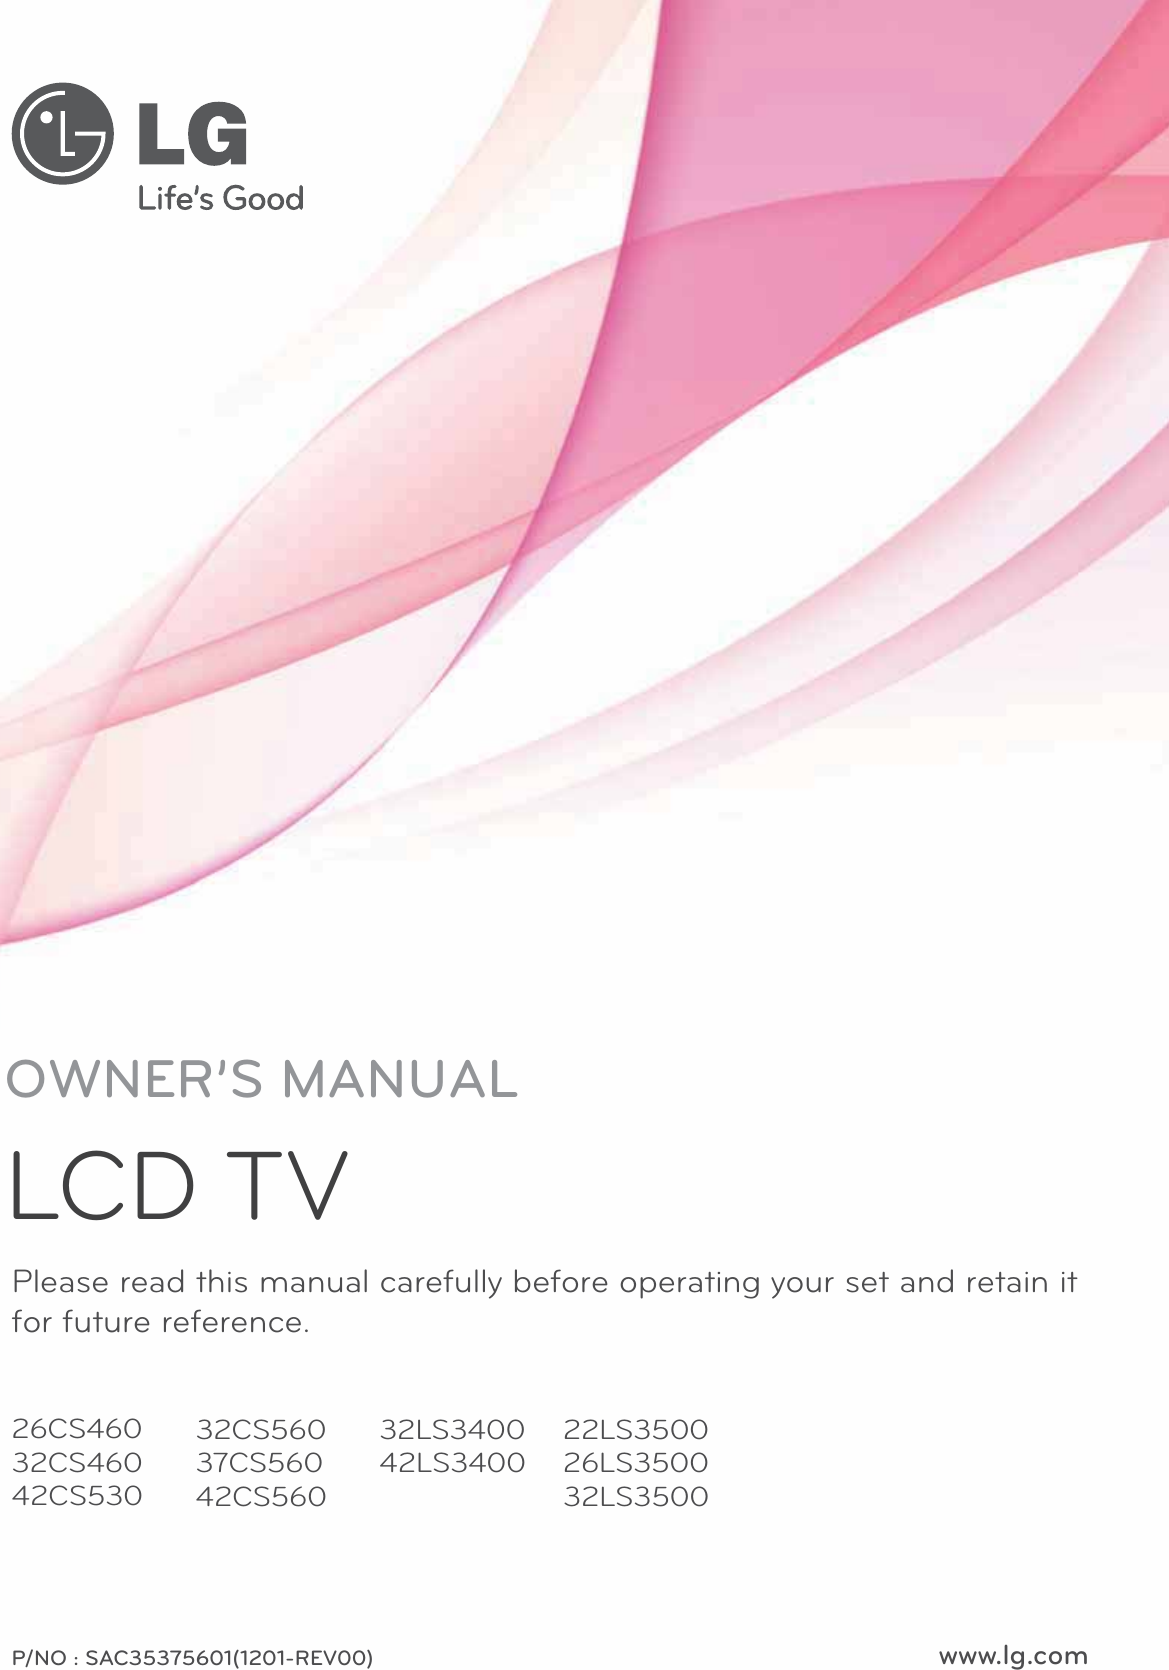 www.lg.comPlease read this manual carefully before operating your set and retain it for future reference.26CS46032CS46042CS530P/NO : SAC35375601(1201-REV00)32CS56037CS56042CS56032LS340042LS340022LS350026LS350032LS3500OWNER’S MANUALLCD TV